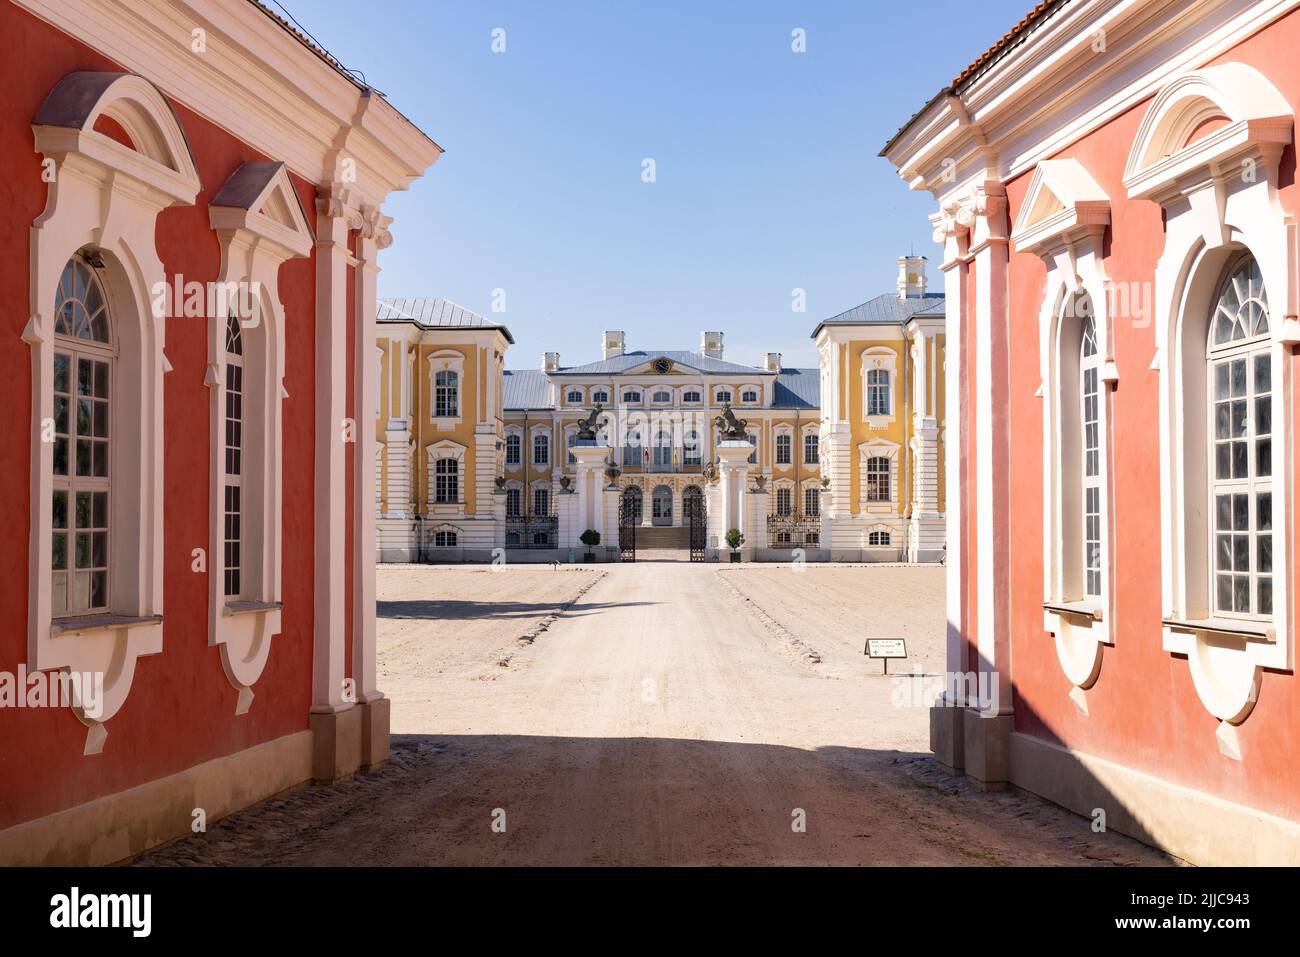 Rundale Palace, Latvia; an 18th century Baroque palace built by Ernst Johann von Biron in the 1700s, now a museum and garden,  Latvia, Europe Stock Photo